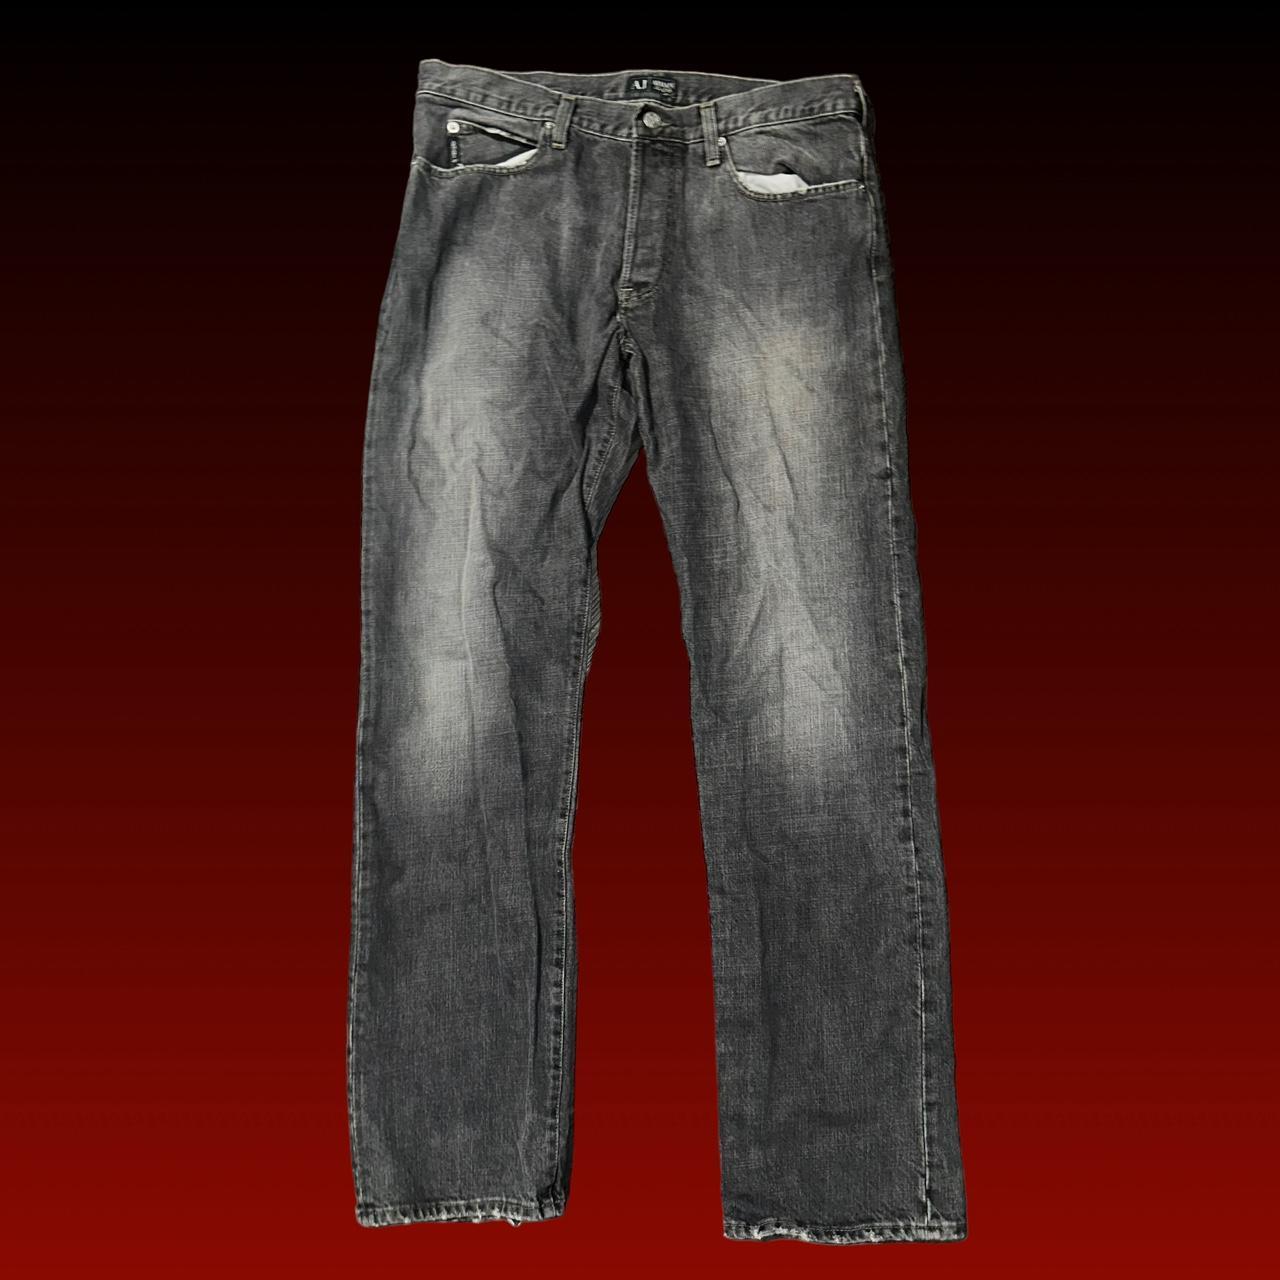 Armani Jeans Men's Grey and Black Jeans